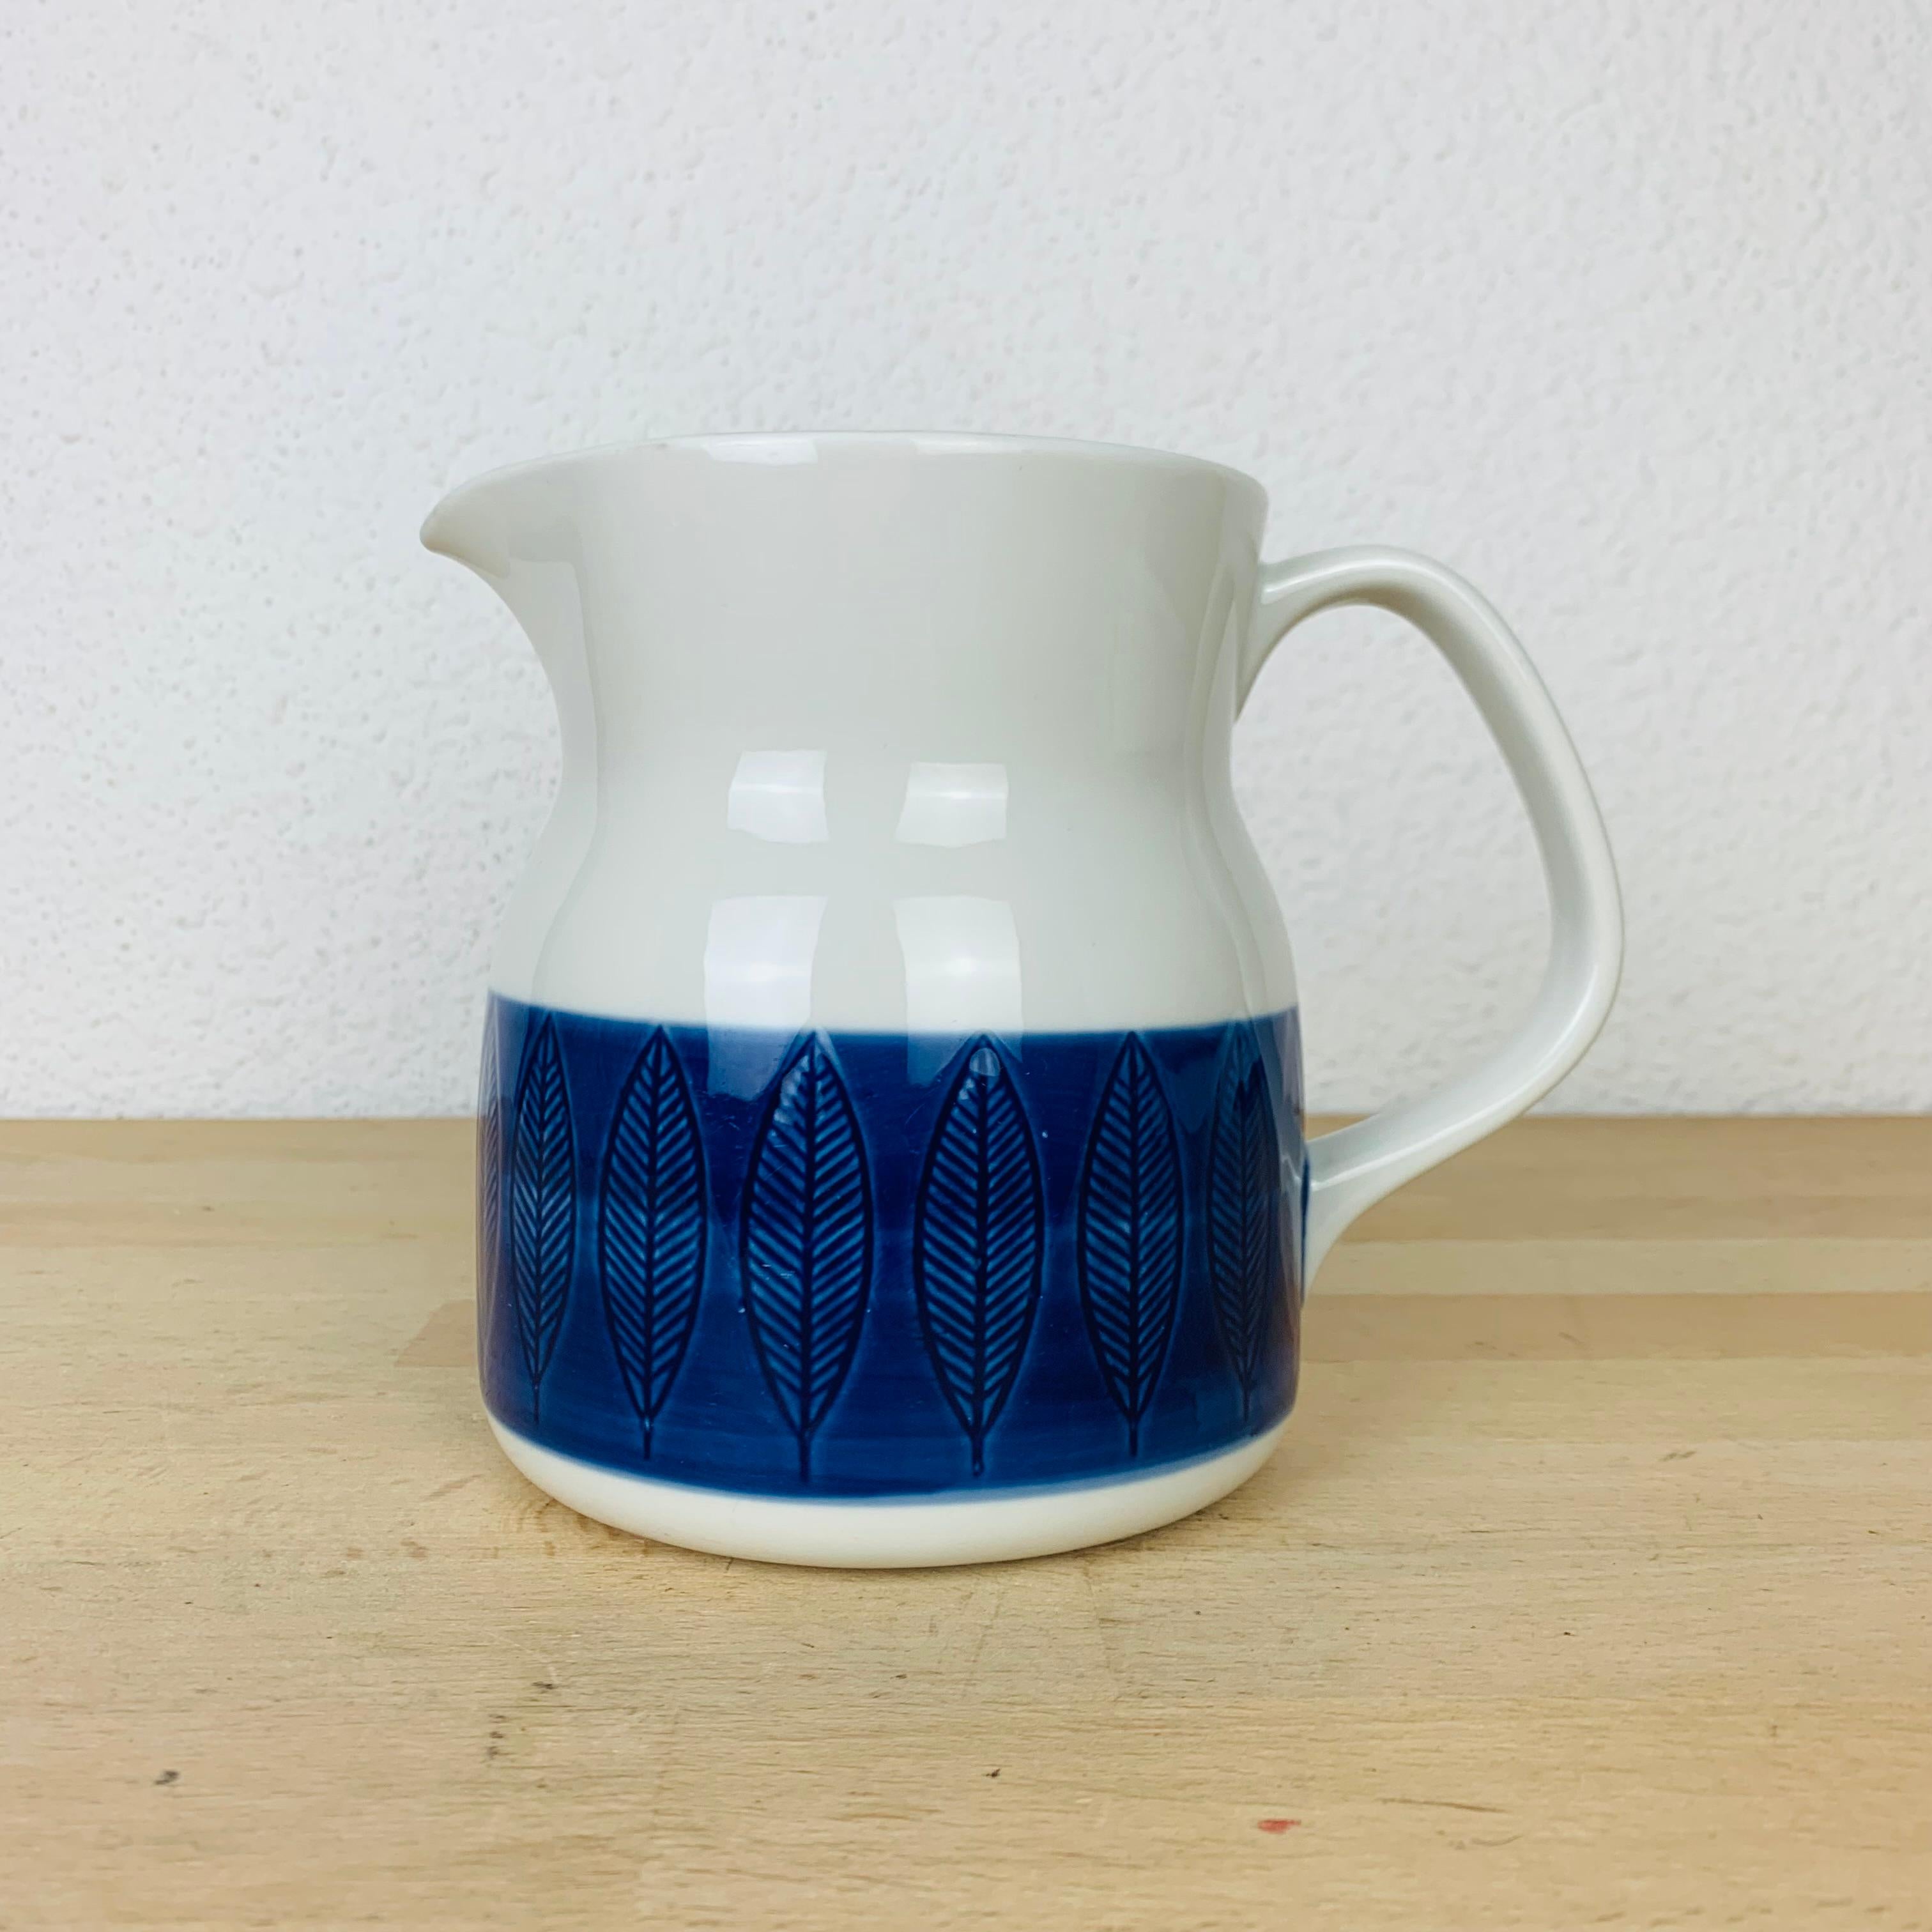 Koka pitcher by Hertha Bengtson for Rörstrand Sweden, manufactured in the 1960's. 

Slight wear due to its age and use, no chip, no crack. 

Measurements : height 14 cm, top diameter 10, 5 cm, bottom diameter 12 cm, total width 18 cm.